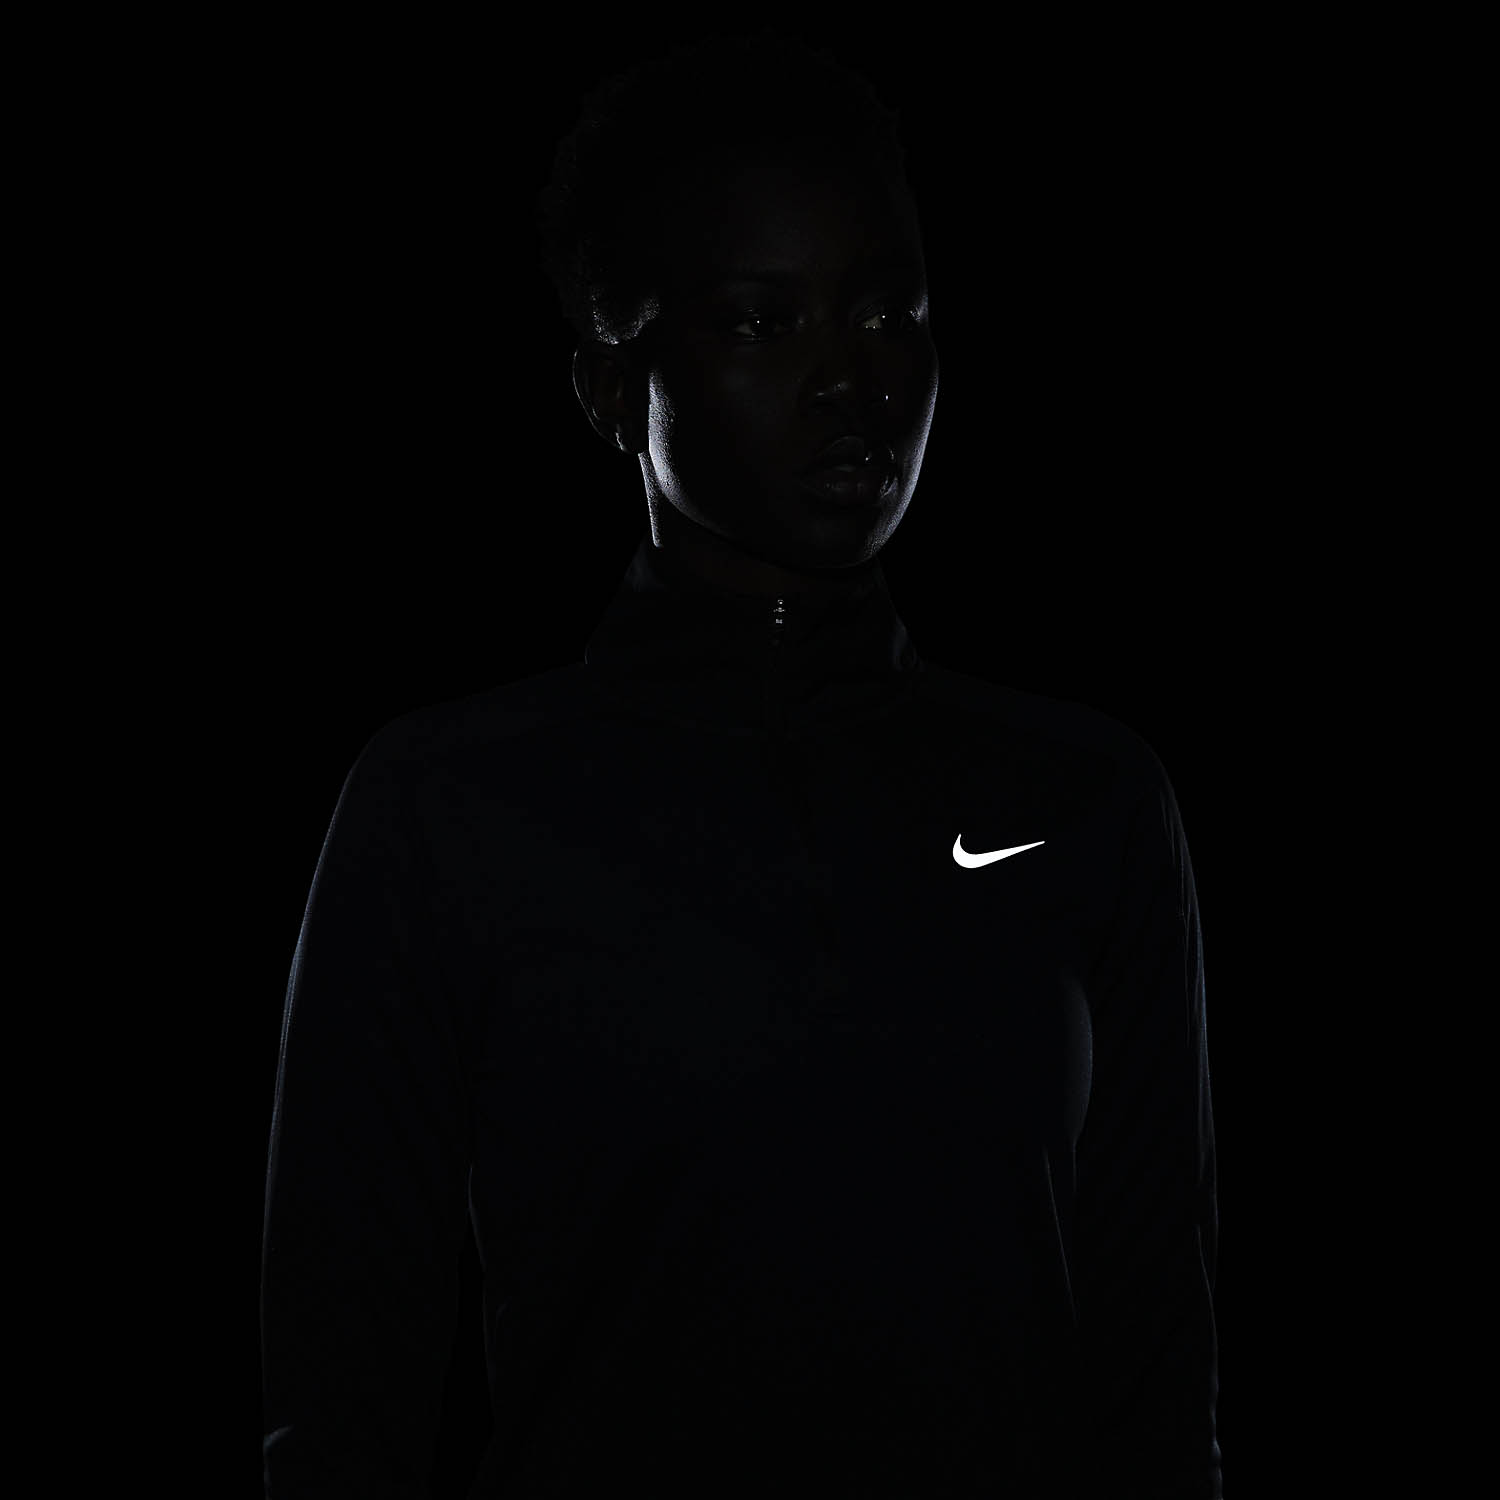 Nike Dri-FIT Pacer Camisa - Black/Reflective Silver